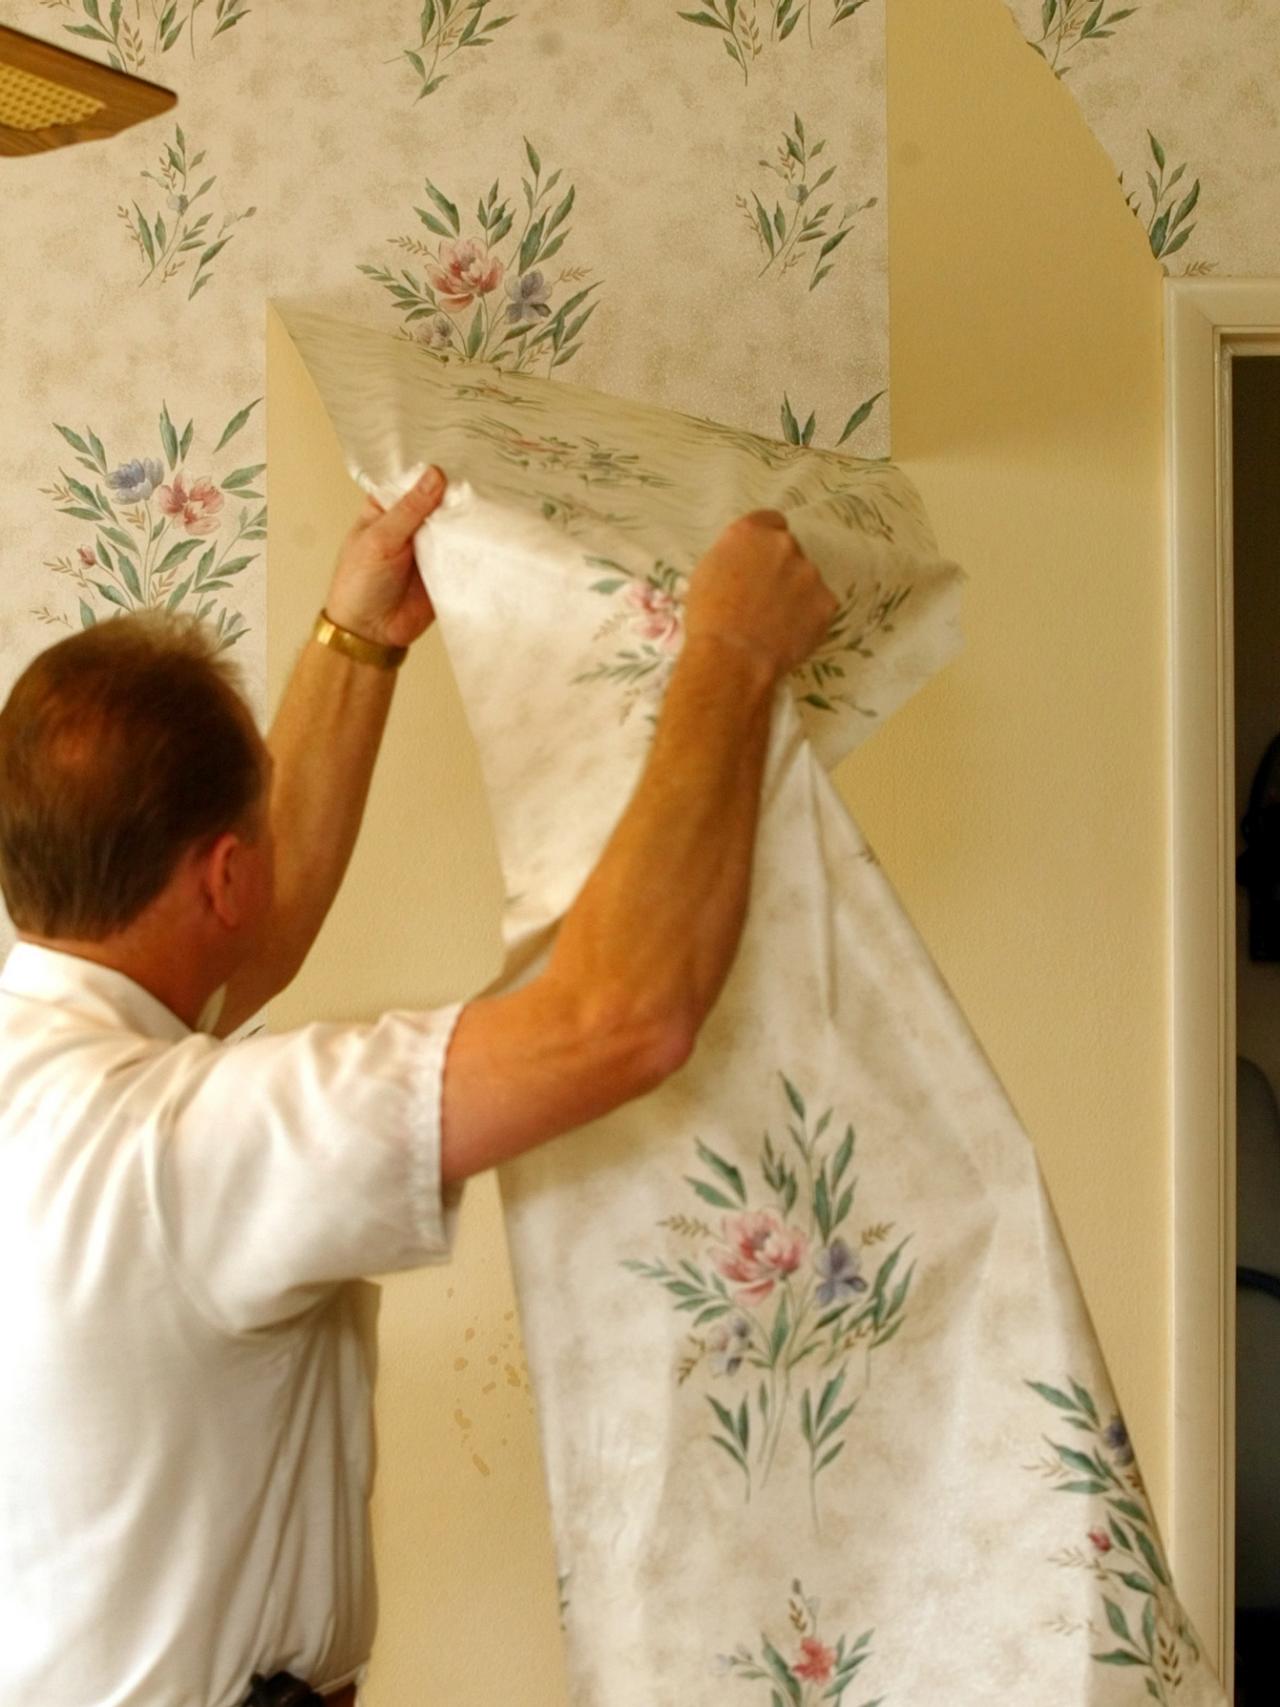 Wallpaper Contractor Demonstrates The Proper Way To Remove